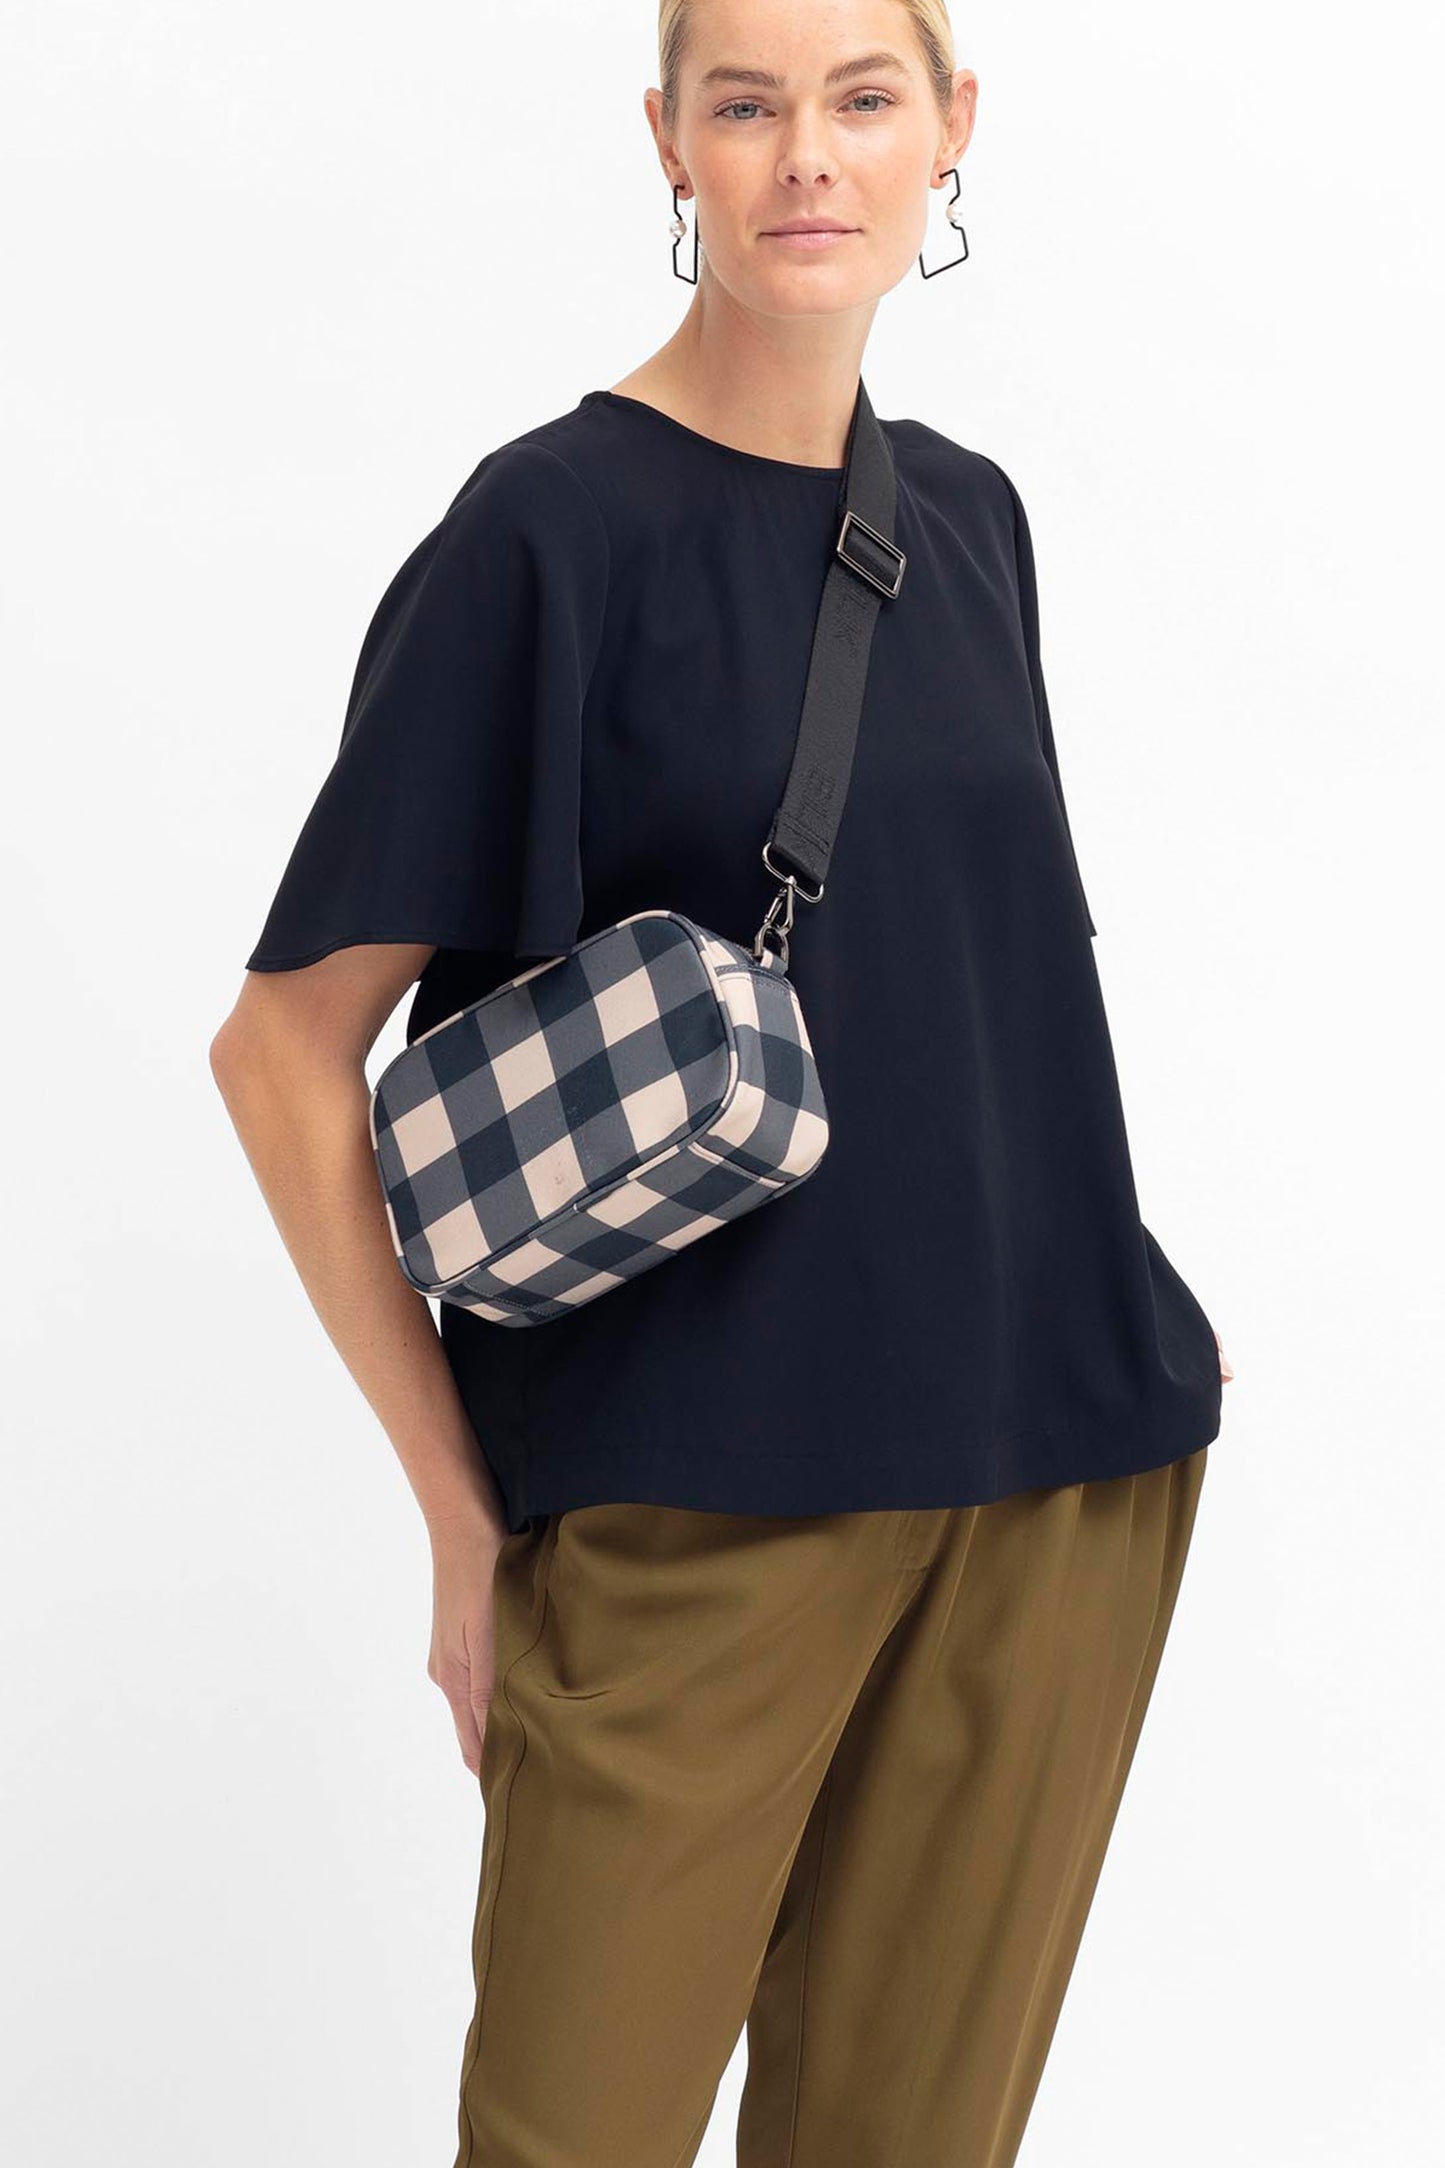 Kassel Recycled Fabric Gingham Print Zip Up Cross Body Bag Model Front | BLACK CAMEL GINGHAM